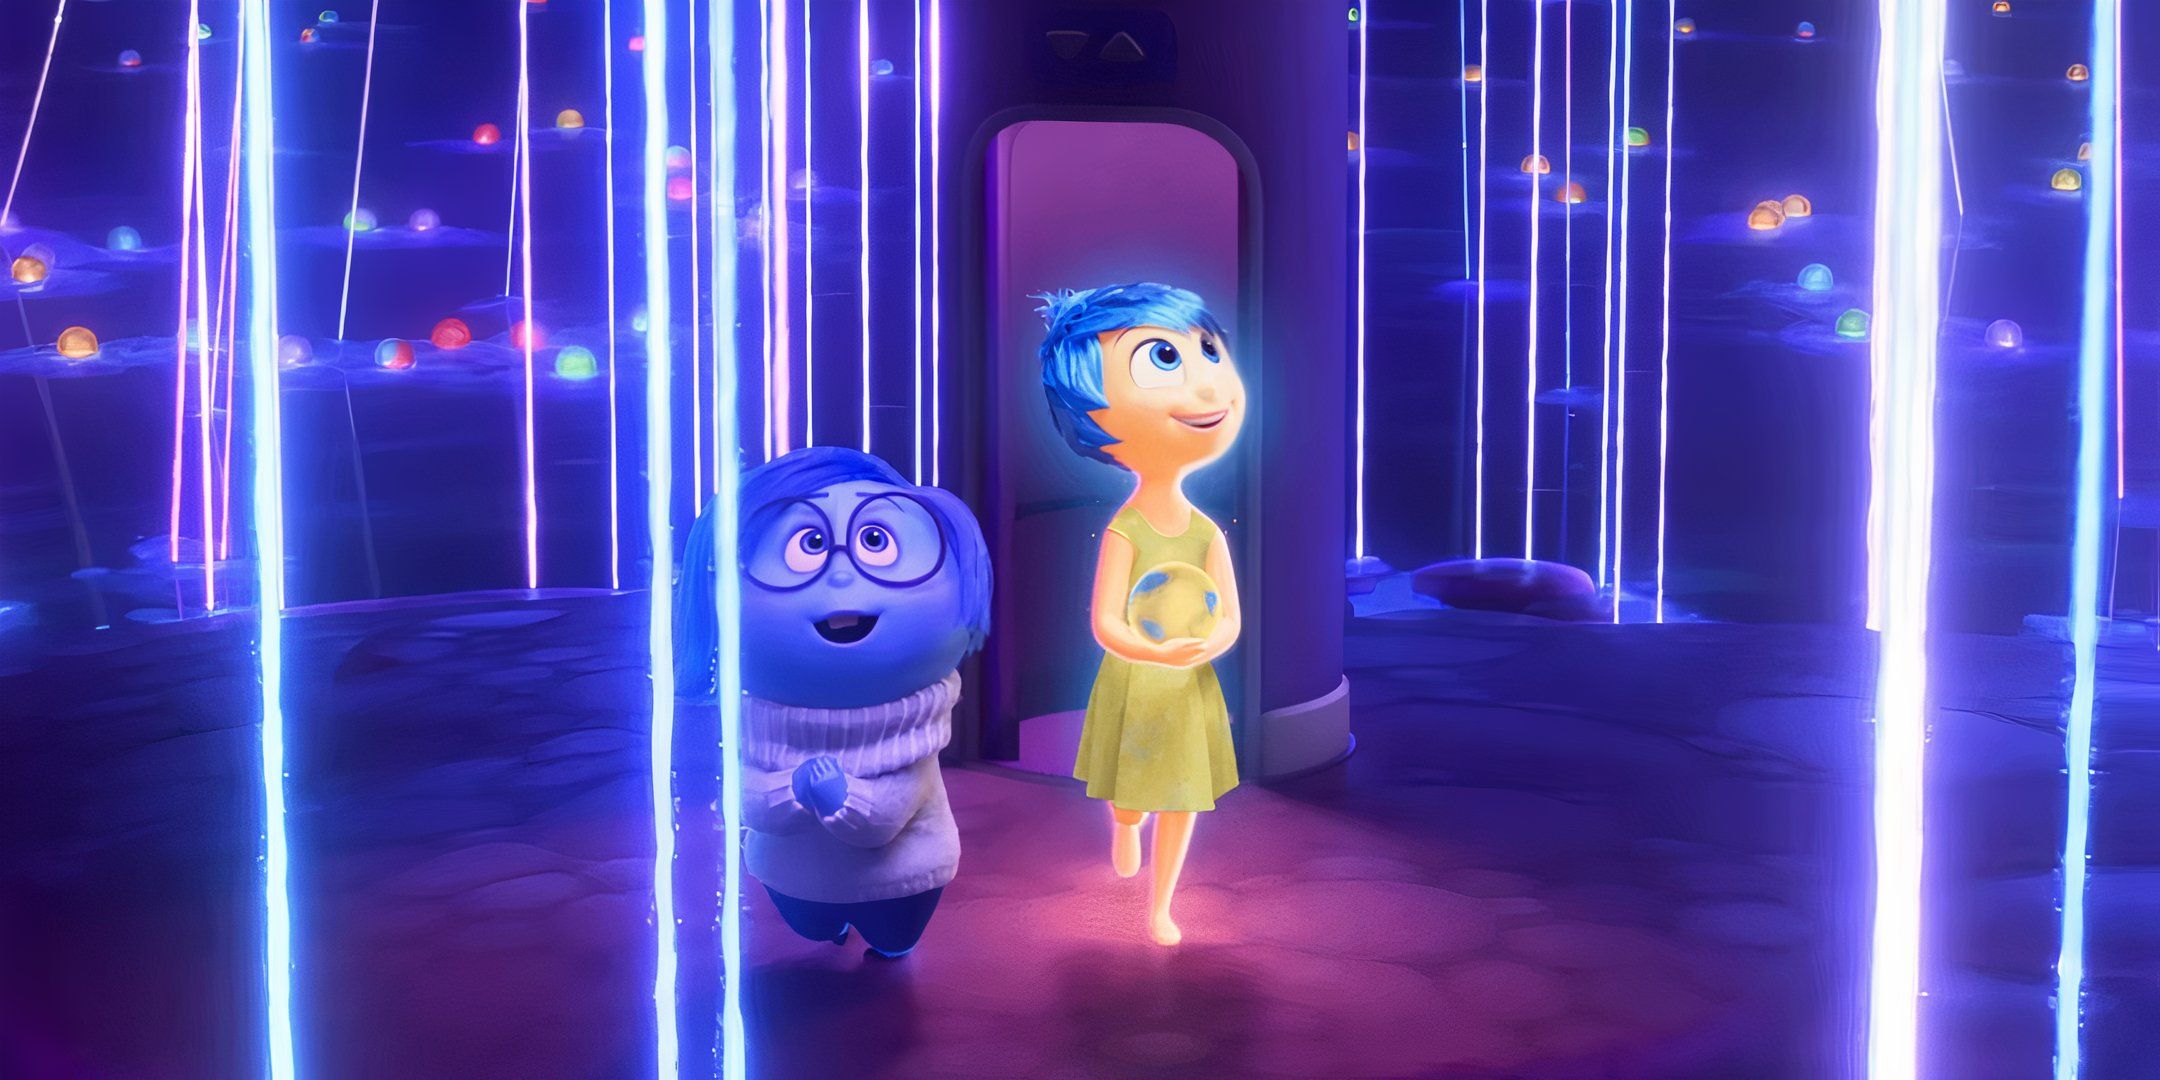 Amy Pohler as Joy and Phyllis Smith as Sadness looking at Riley's beliefs in Inside Out 2.